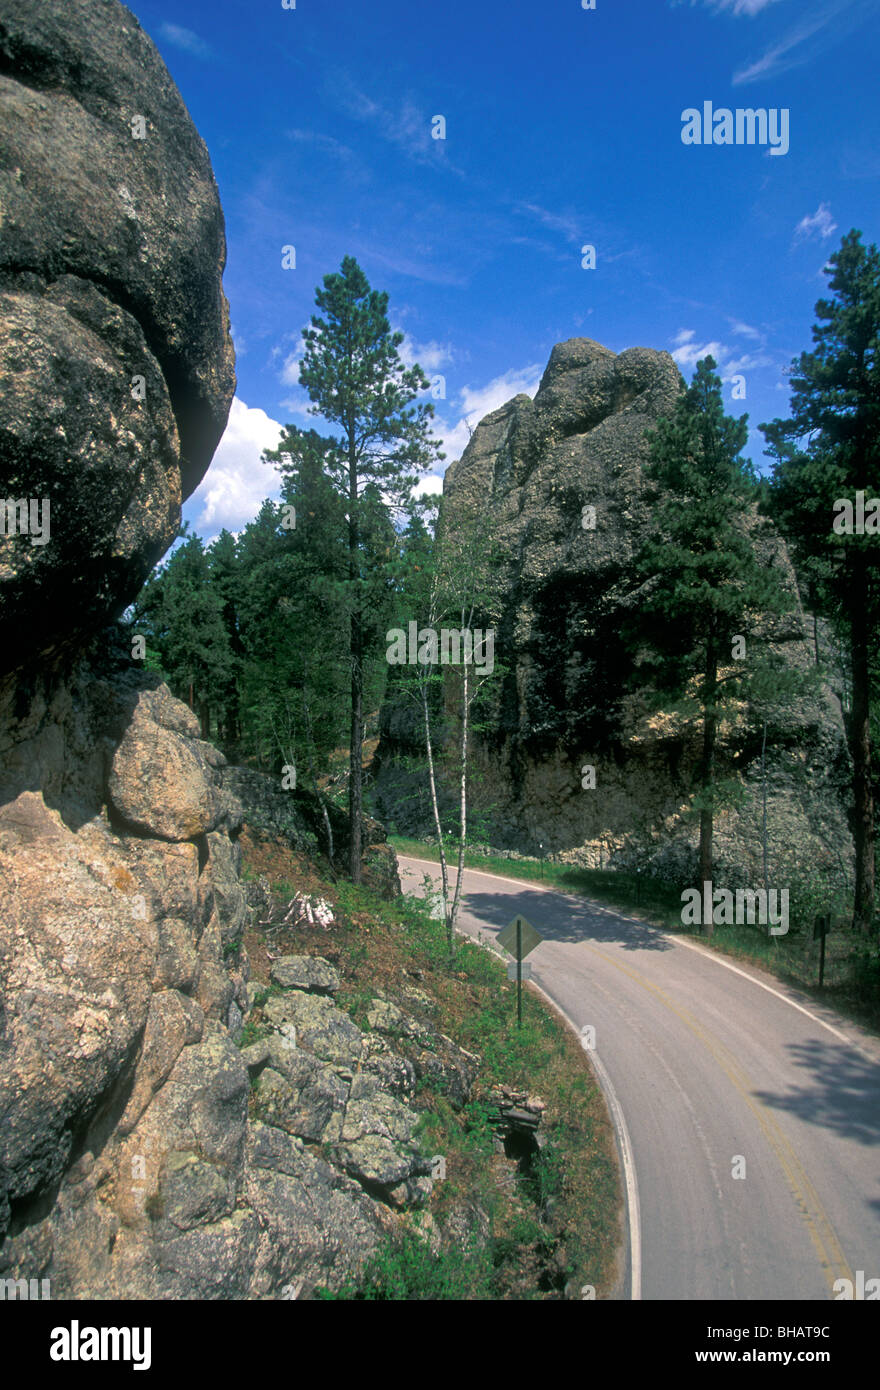 Iron Mountain Road, Peter Norbeck National Scenic Byway, Black Hills, South Dakota, United States Stock Photo